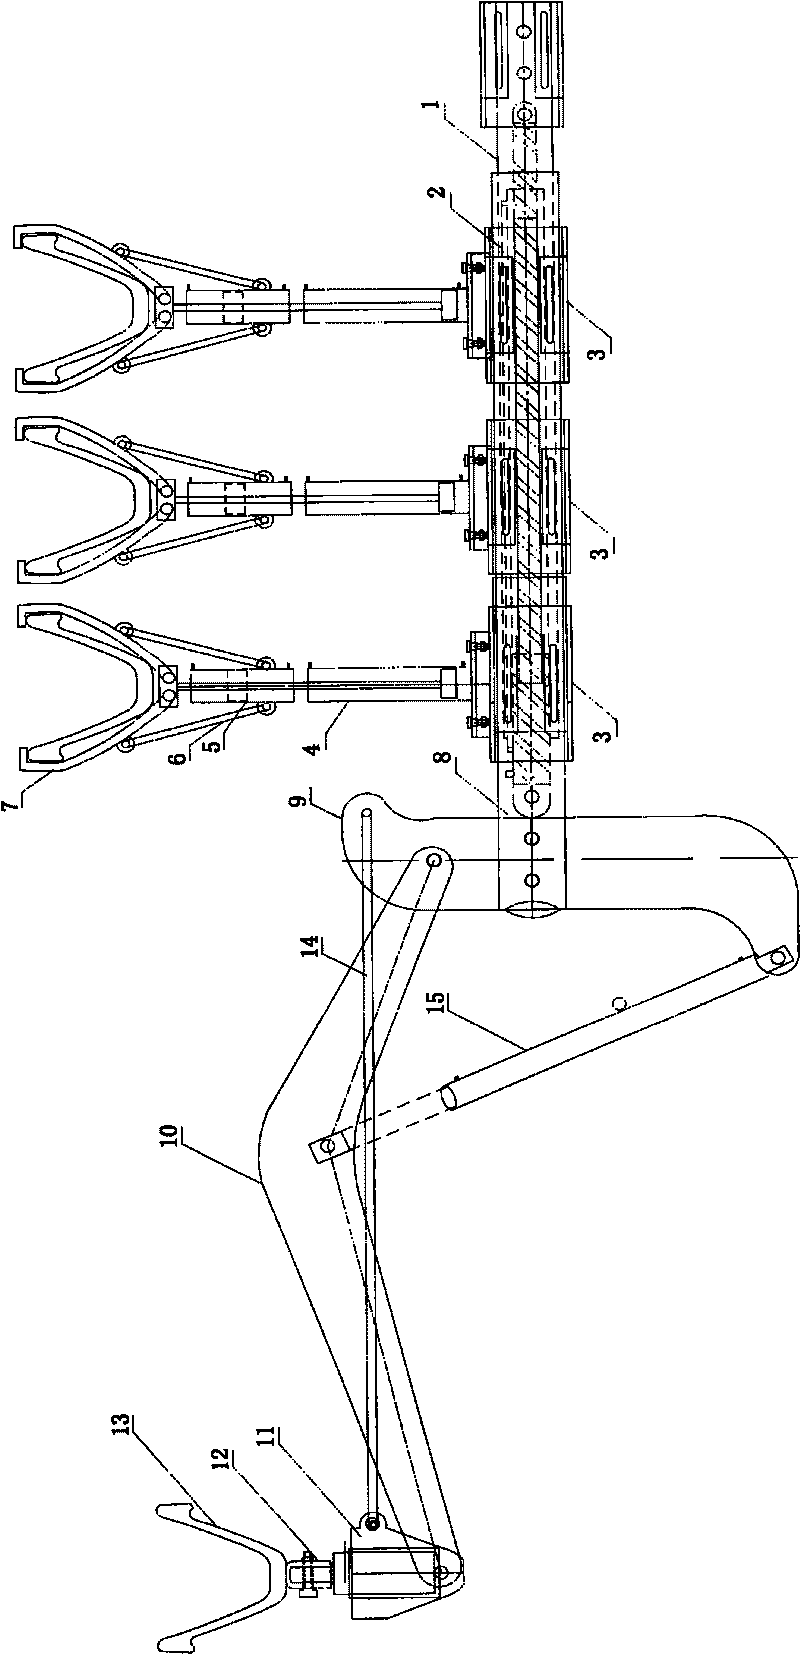 Suspended combined hydraulic beaming device